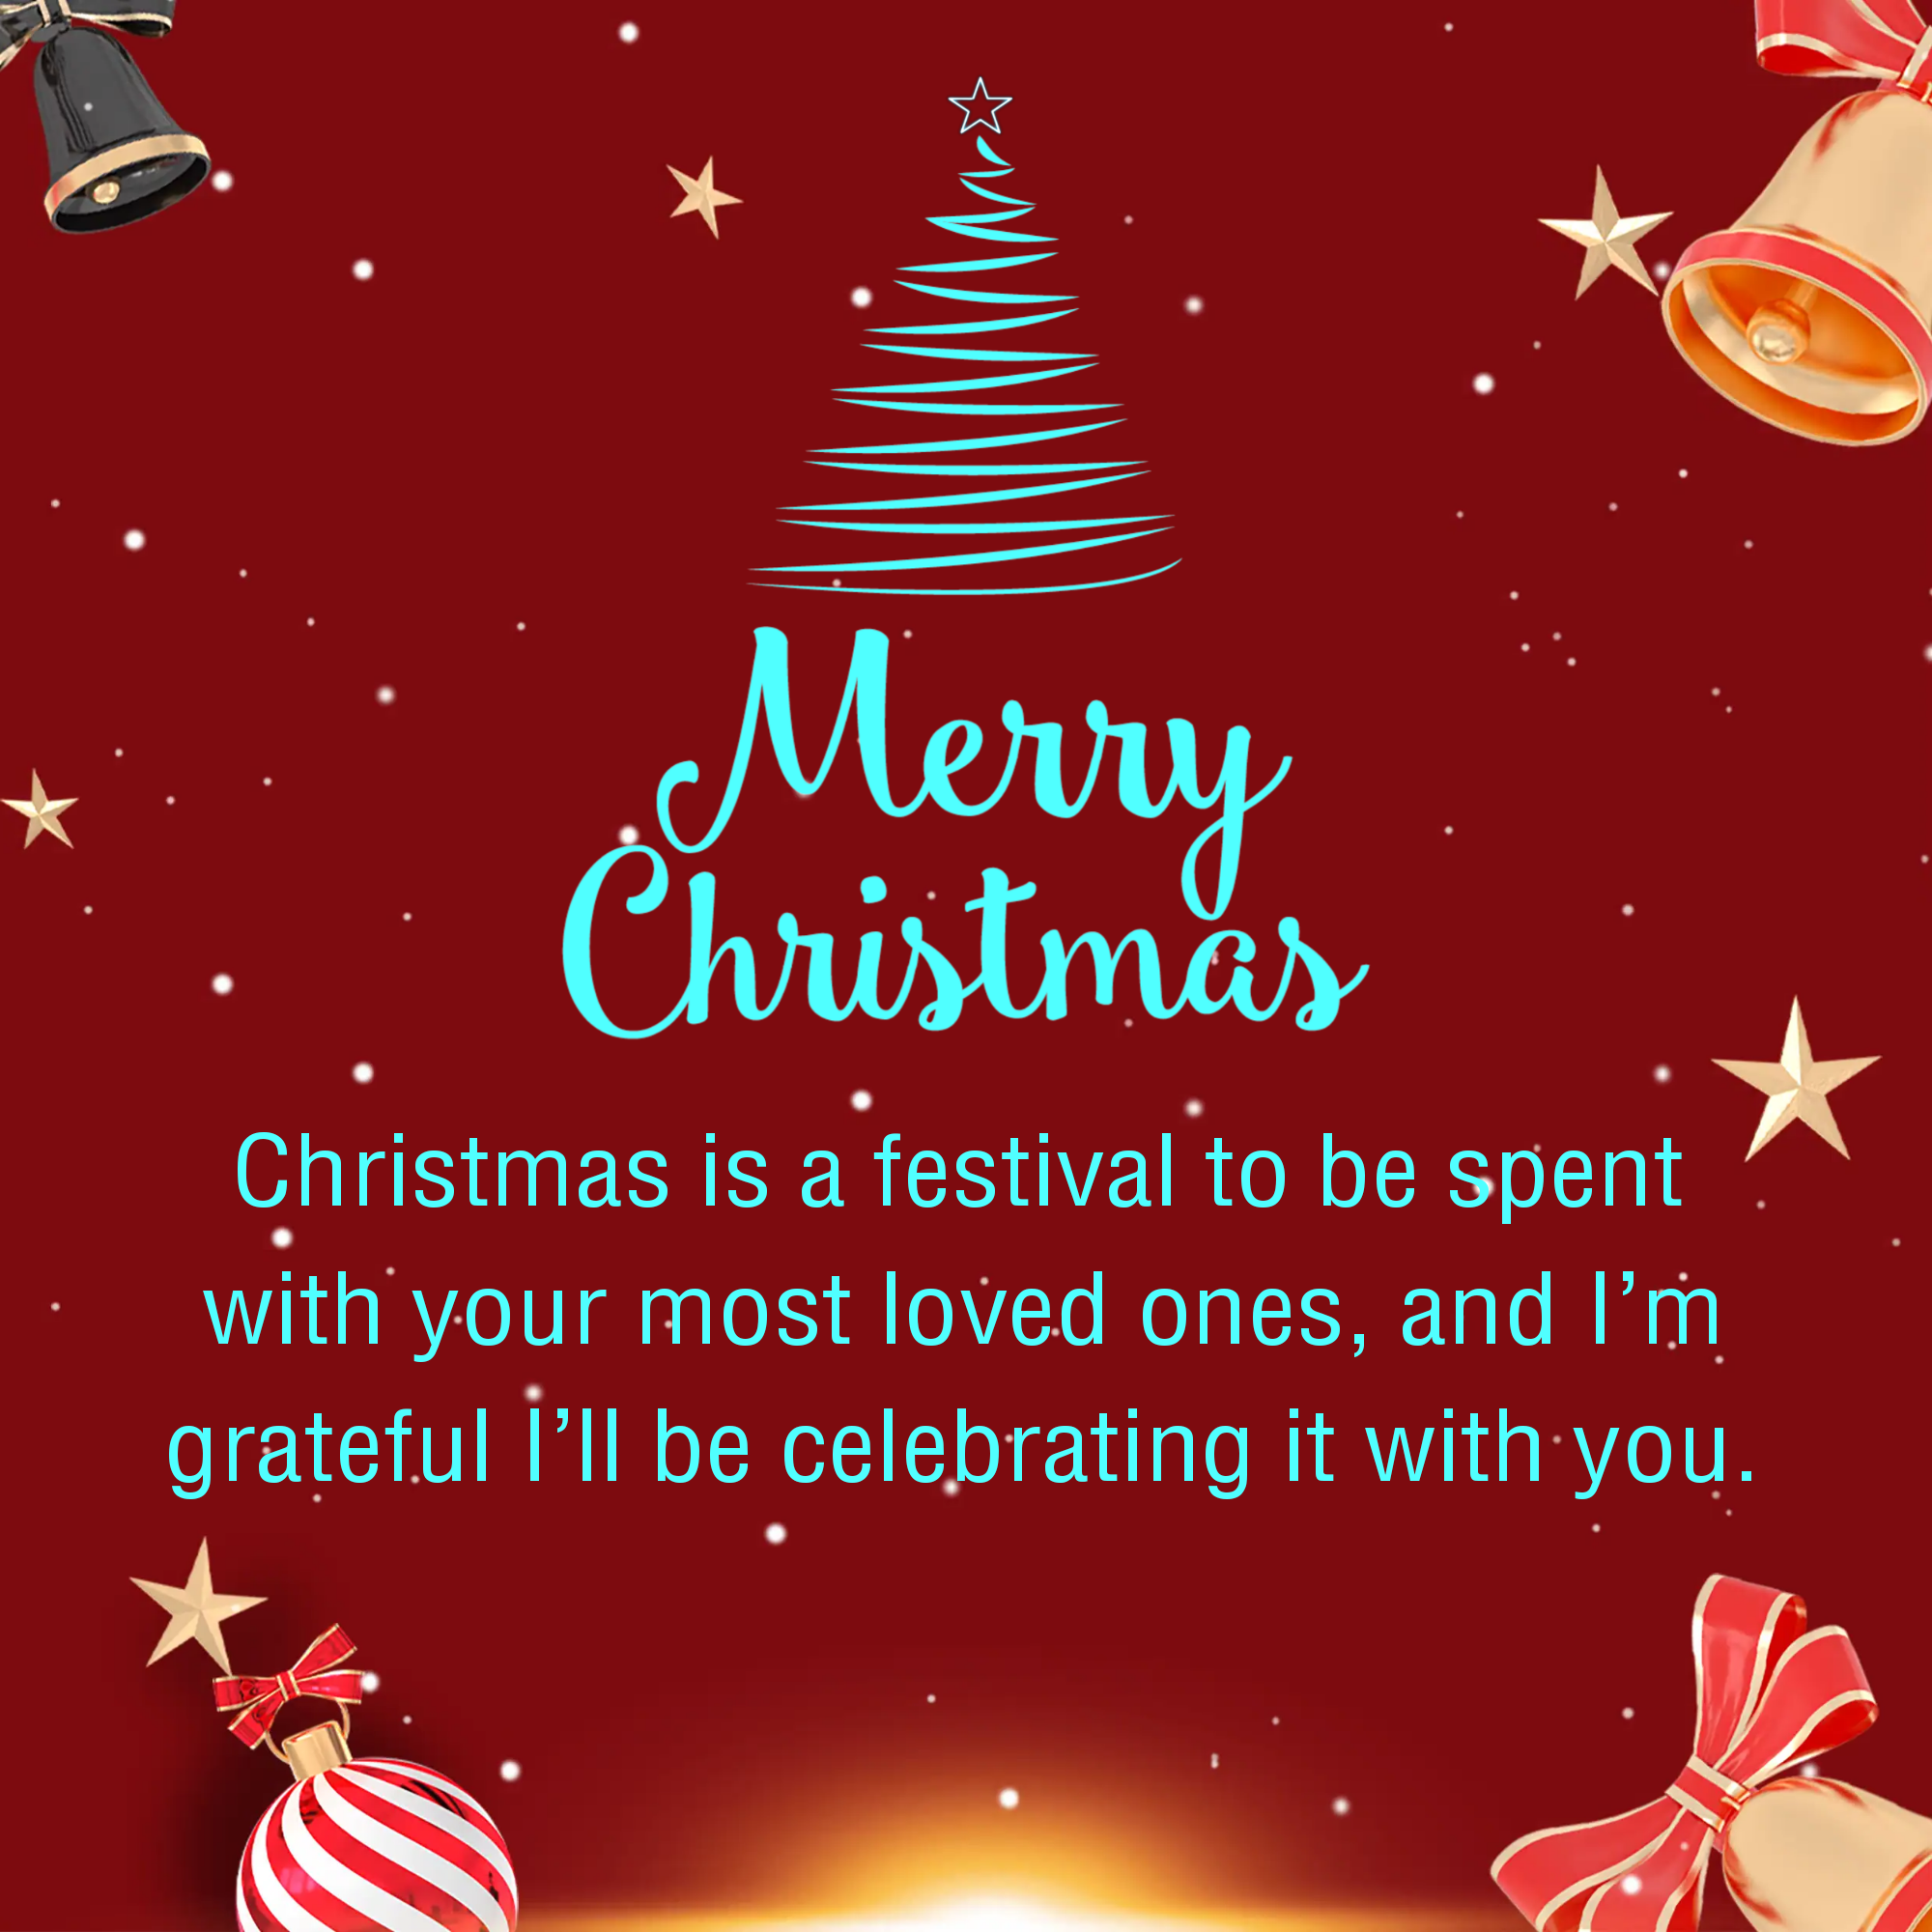 Christmas is a festival to be spent with your most loved ones